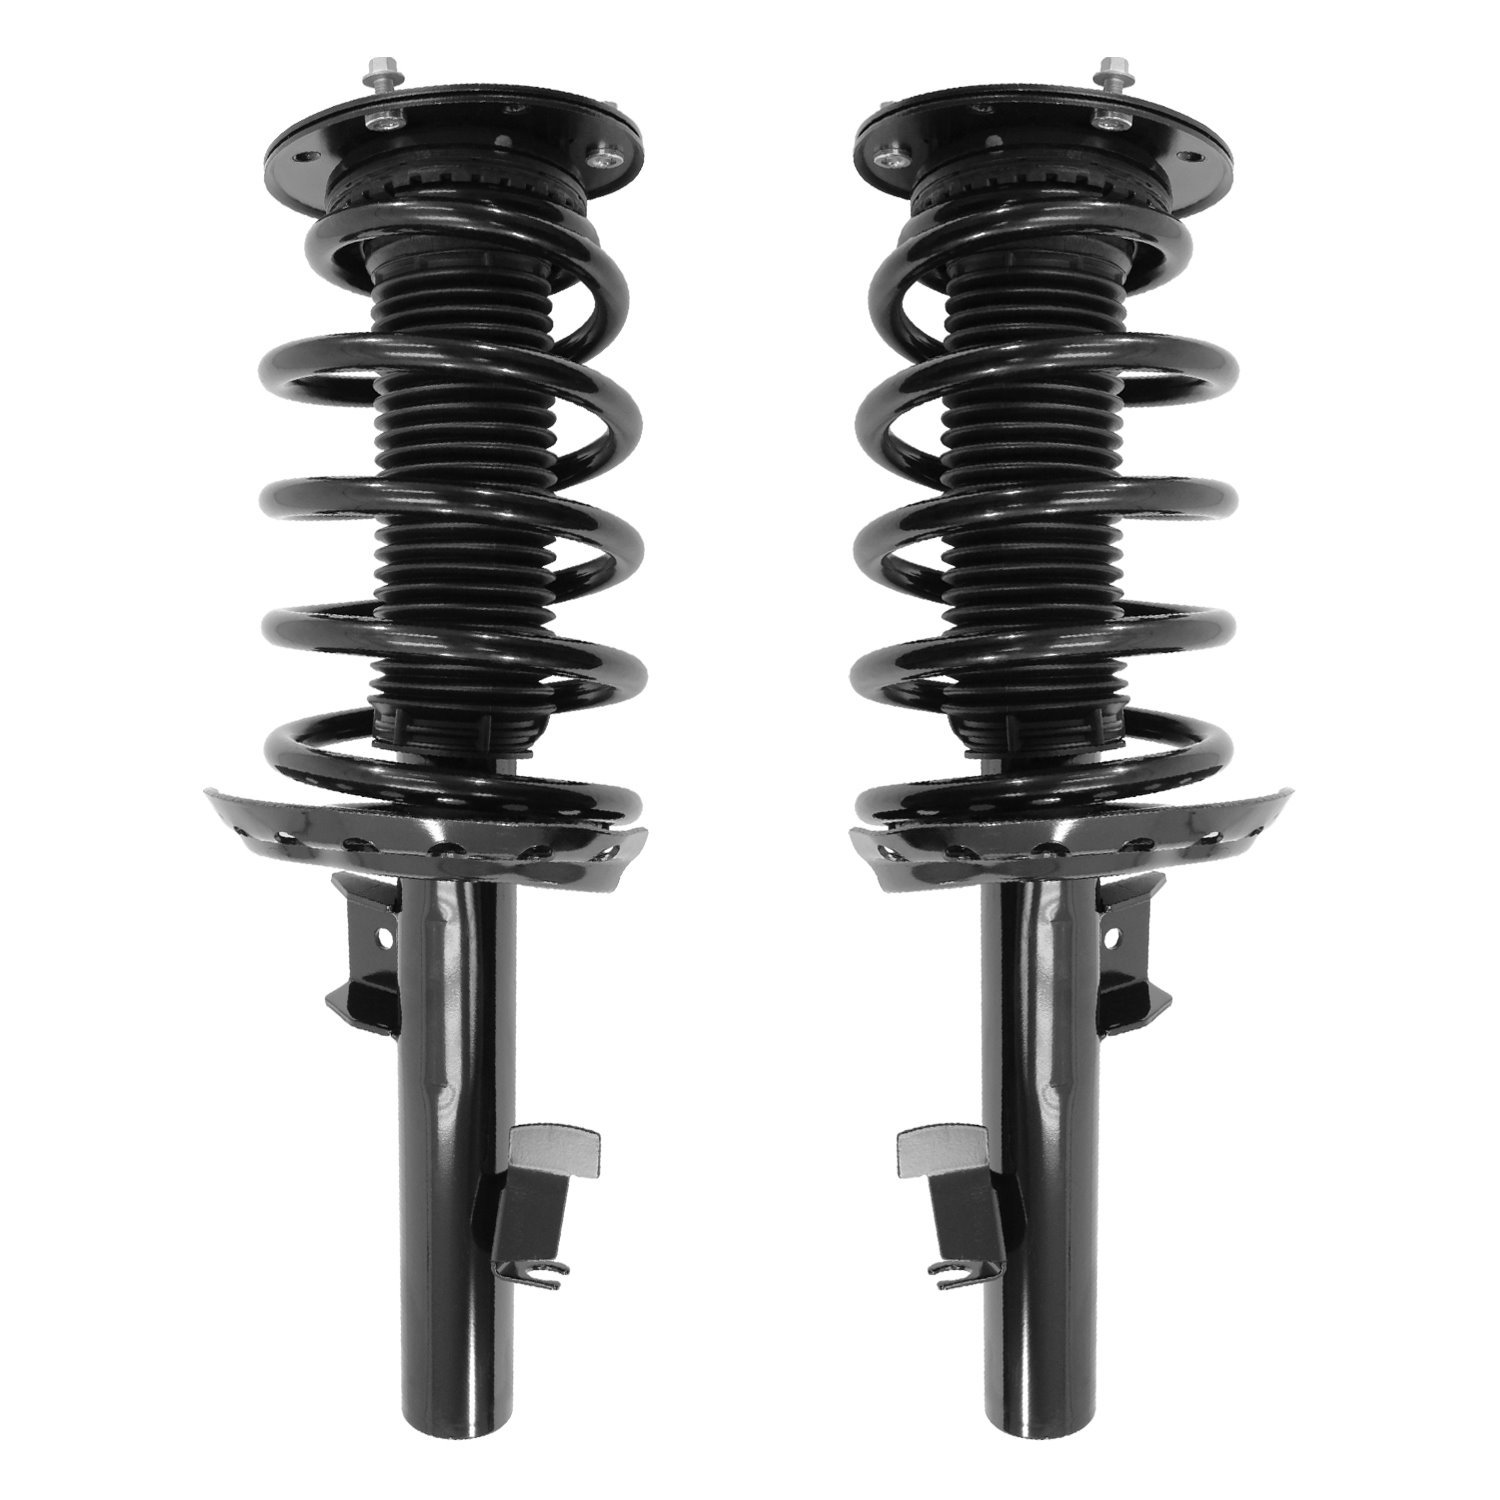 2-13301-13302-001 Front Suspension Strut & Coil Spring Assemby Set Fits Select Volvo XC60